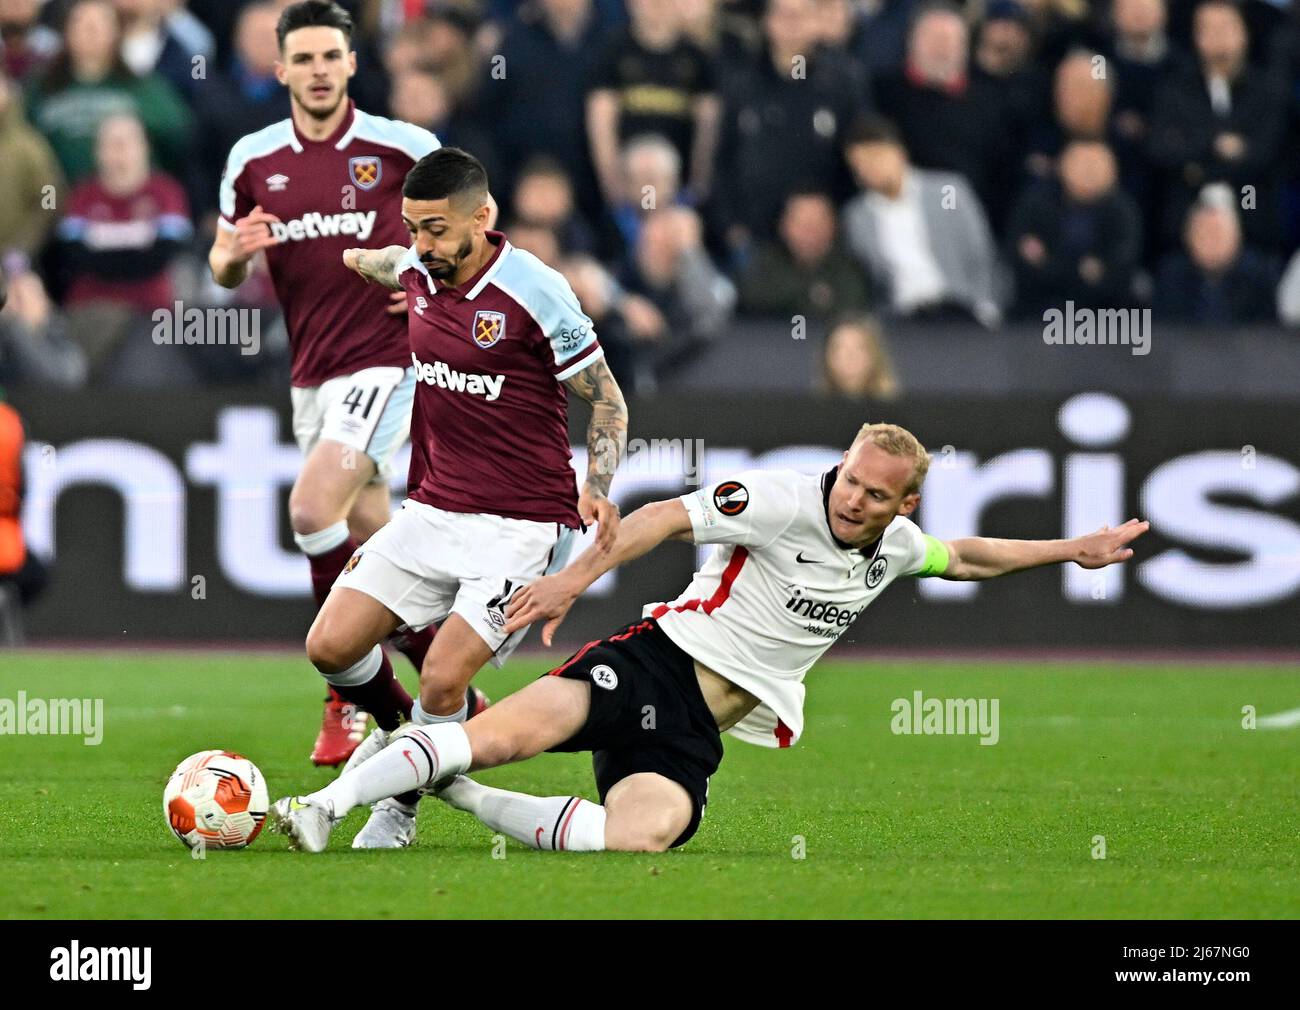 London UK 28th April 2022. Manuel Lanzini (West Ham) is tackled by Sebastian Rode (Frankfurt) during the West Ham vs Eintracht Frankfurt Uefa Europa Cup semi final 1st leg match at the London Stadium, Stratford.Credit: Martin Dalton/Alamy Live News. This Image is for EDITORIAL USE ONLY. Licence required from the the Football DataCo for any other use. Credit: MARTIN DALTON/Alamy Live News Stock Photo